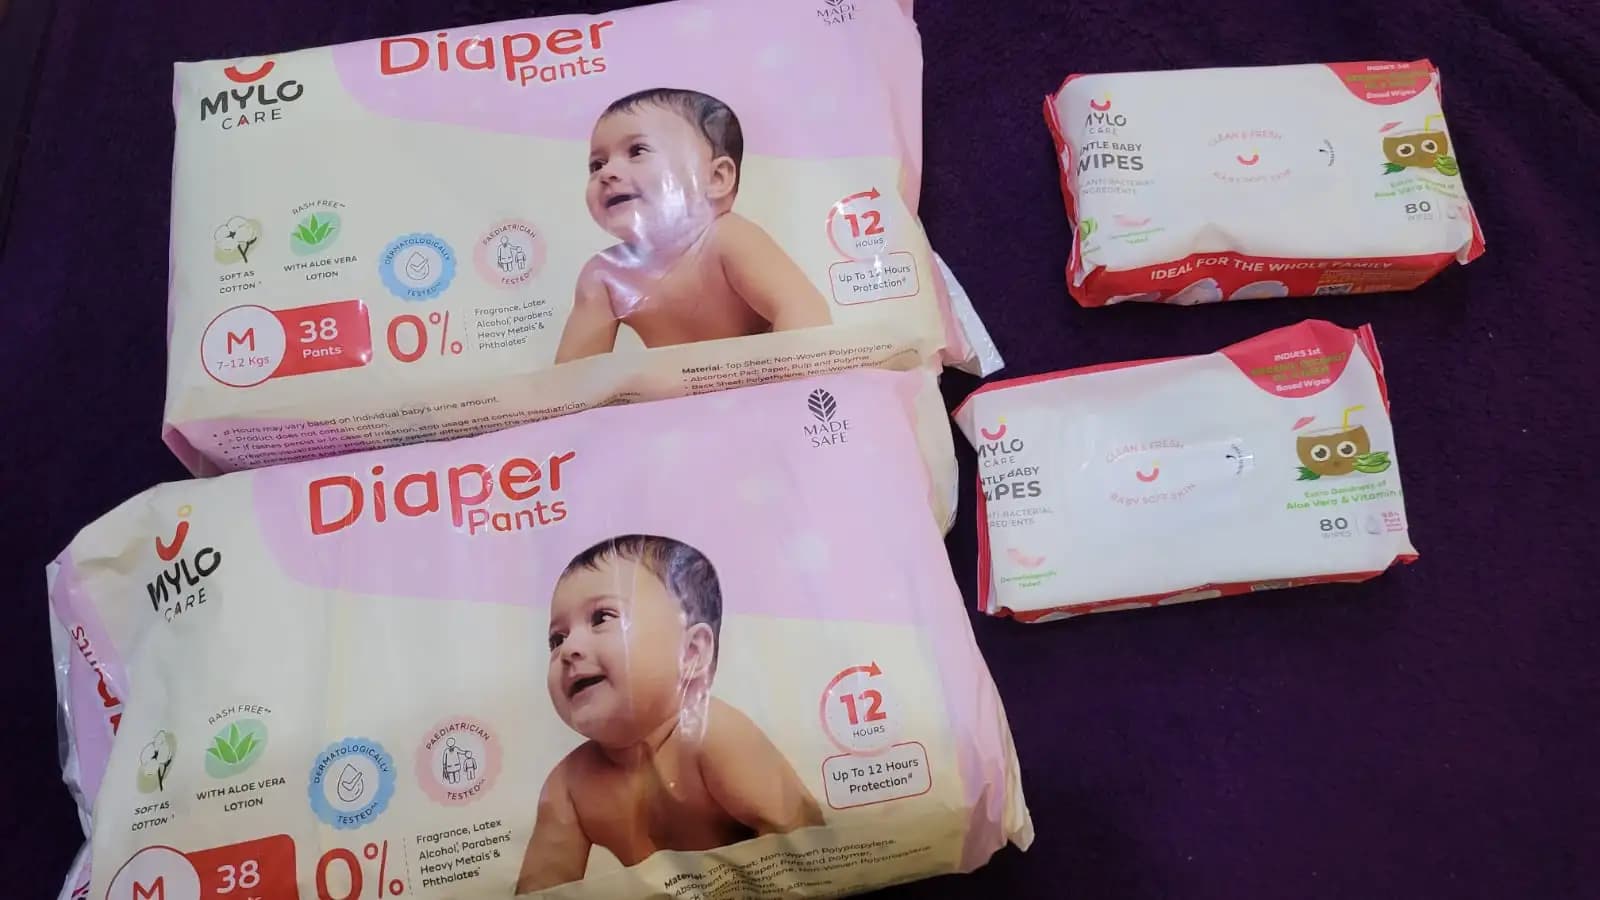 Super Saver Combo - Baby Diaper Pants Small (S) Size 4-8 kgs (84 count) Leak Proof + Tummy Roll On For Baby For Gas & Colic - 40 ml